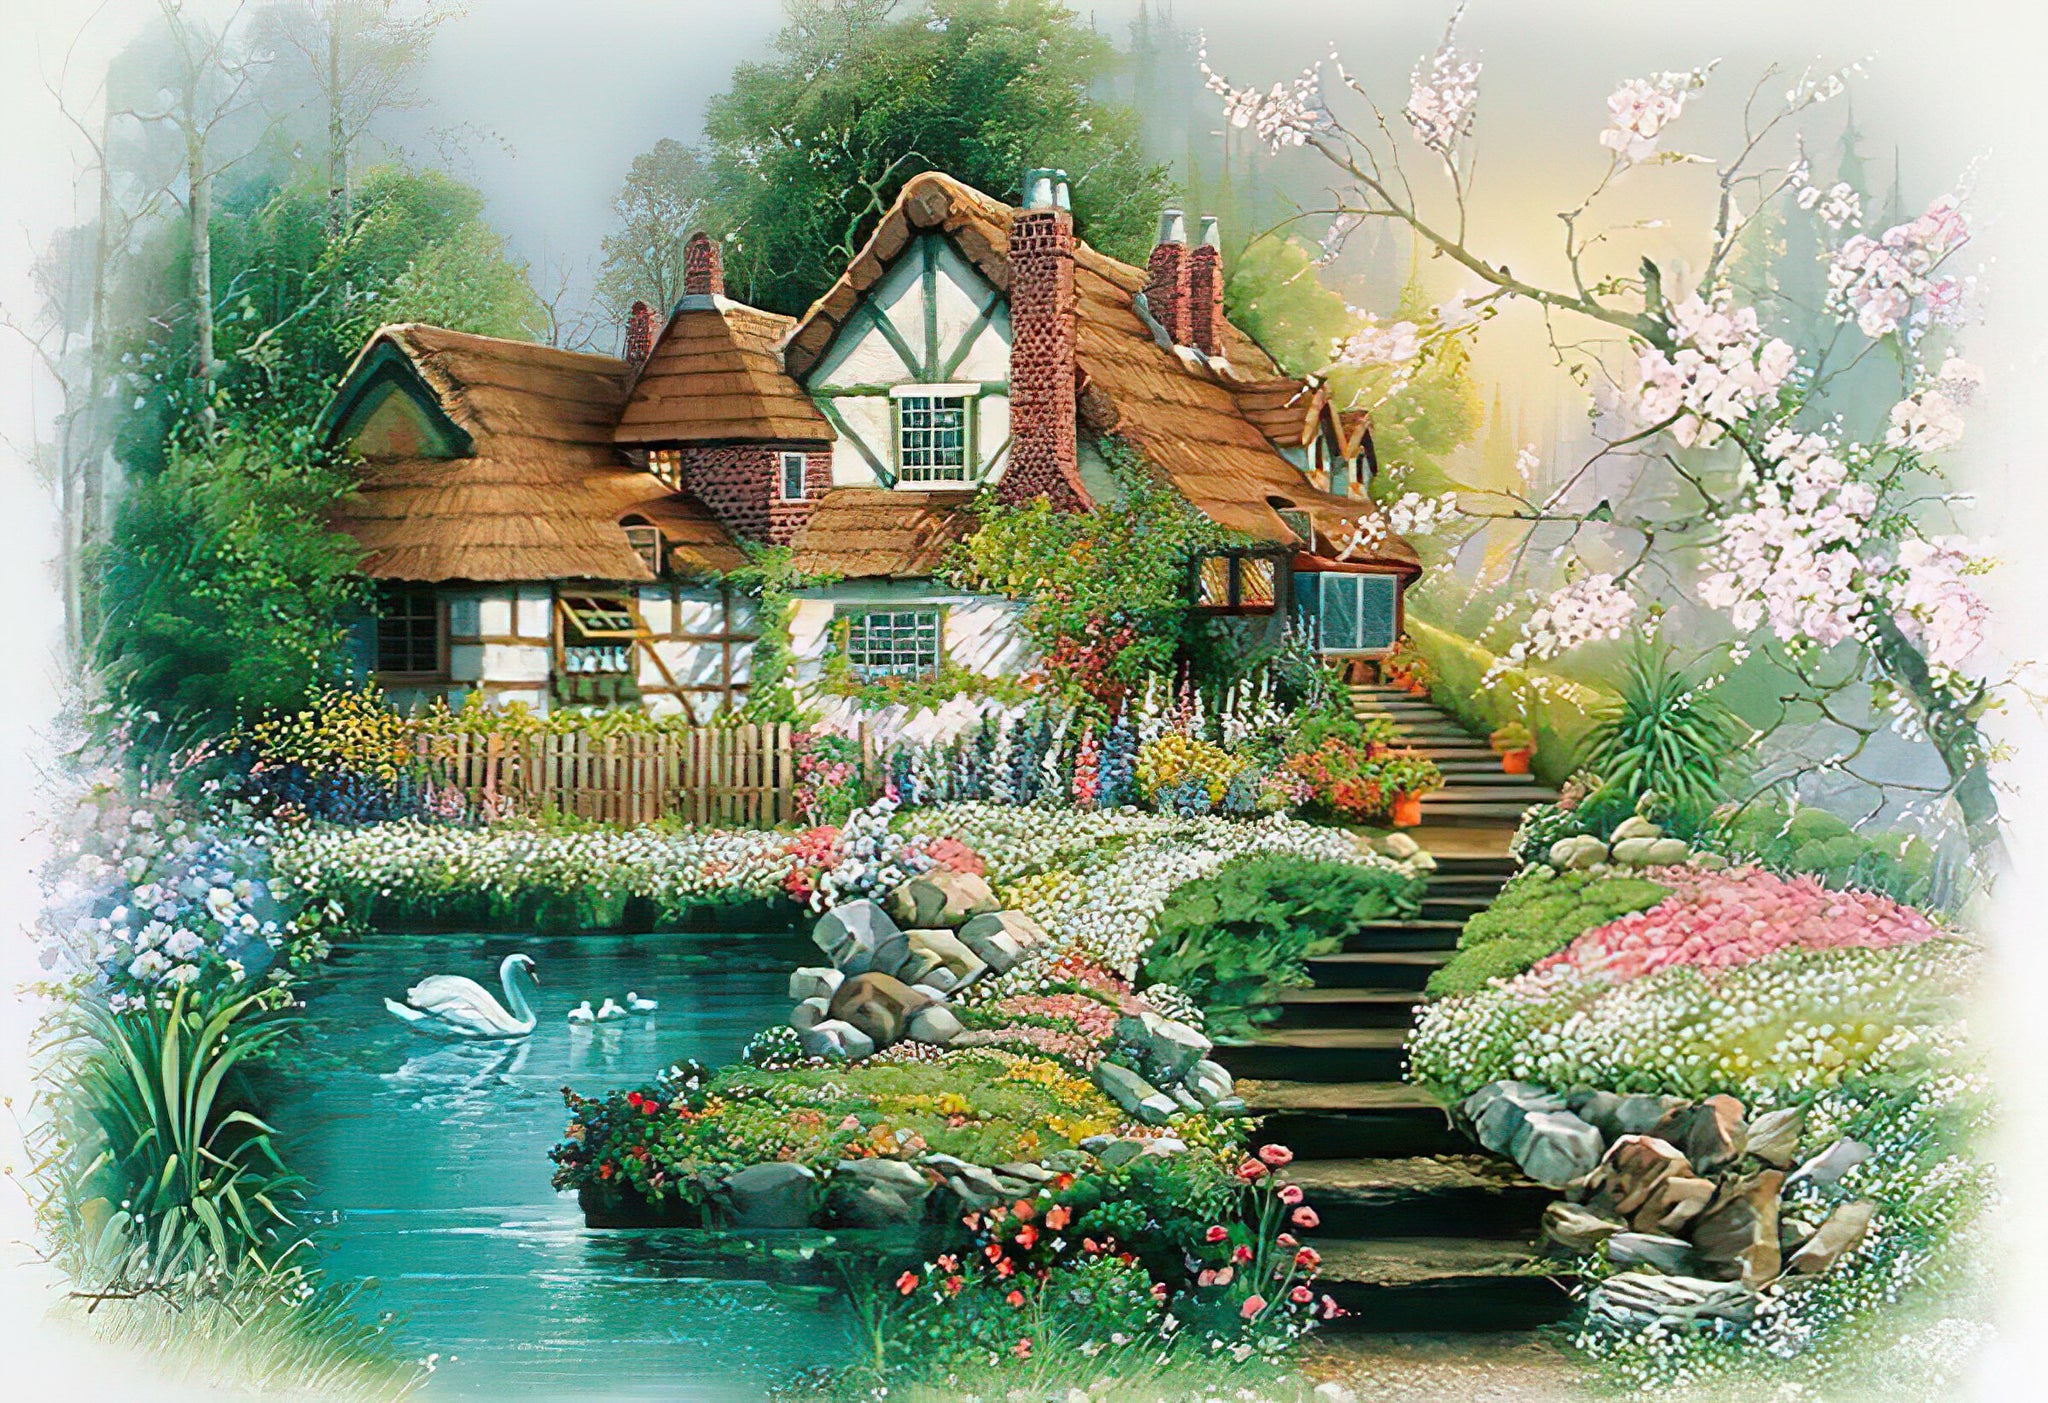 Appleone • Andres Orpinas • Cottage 1　300 PCS　Jigsaw Puzzle